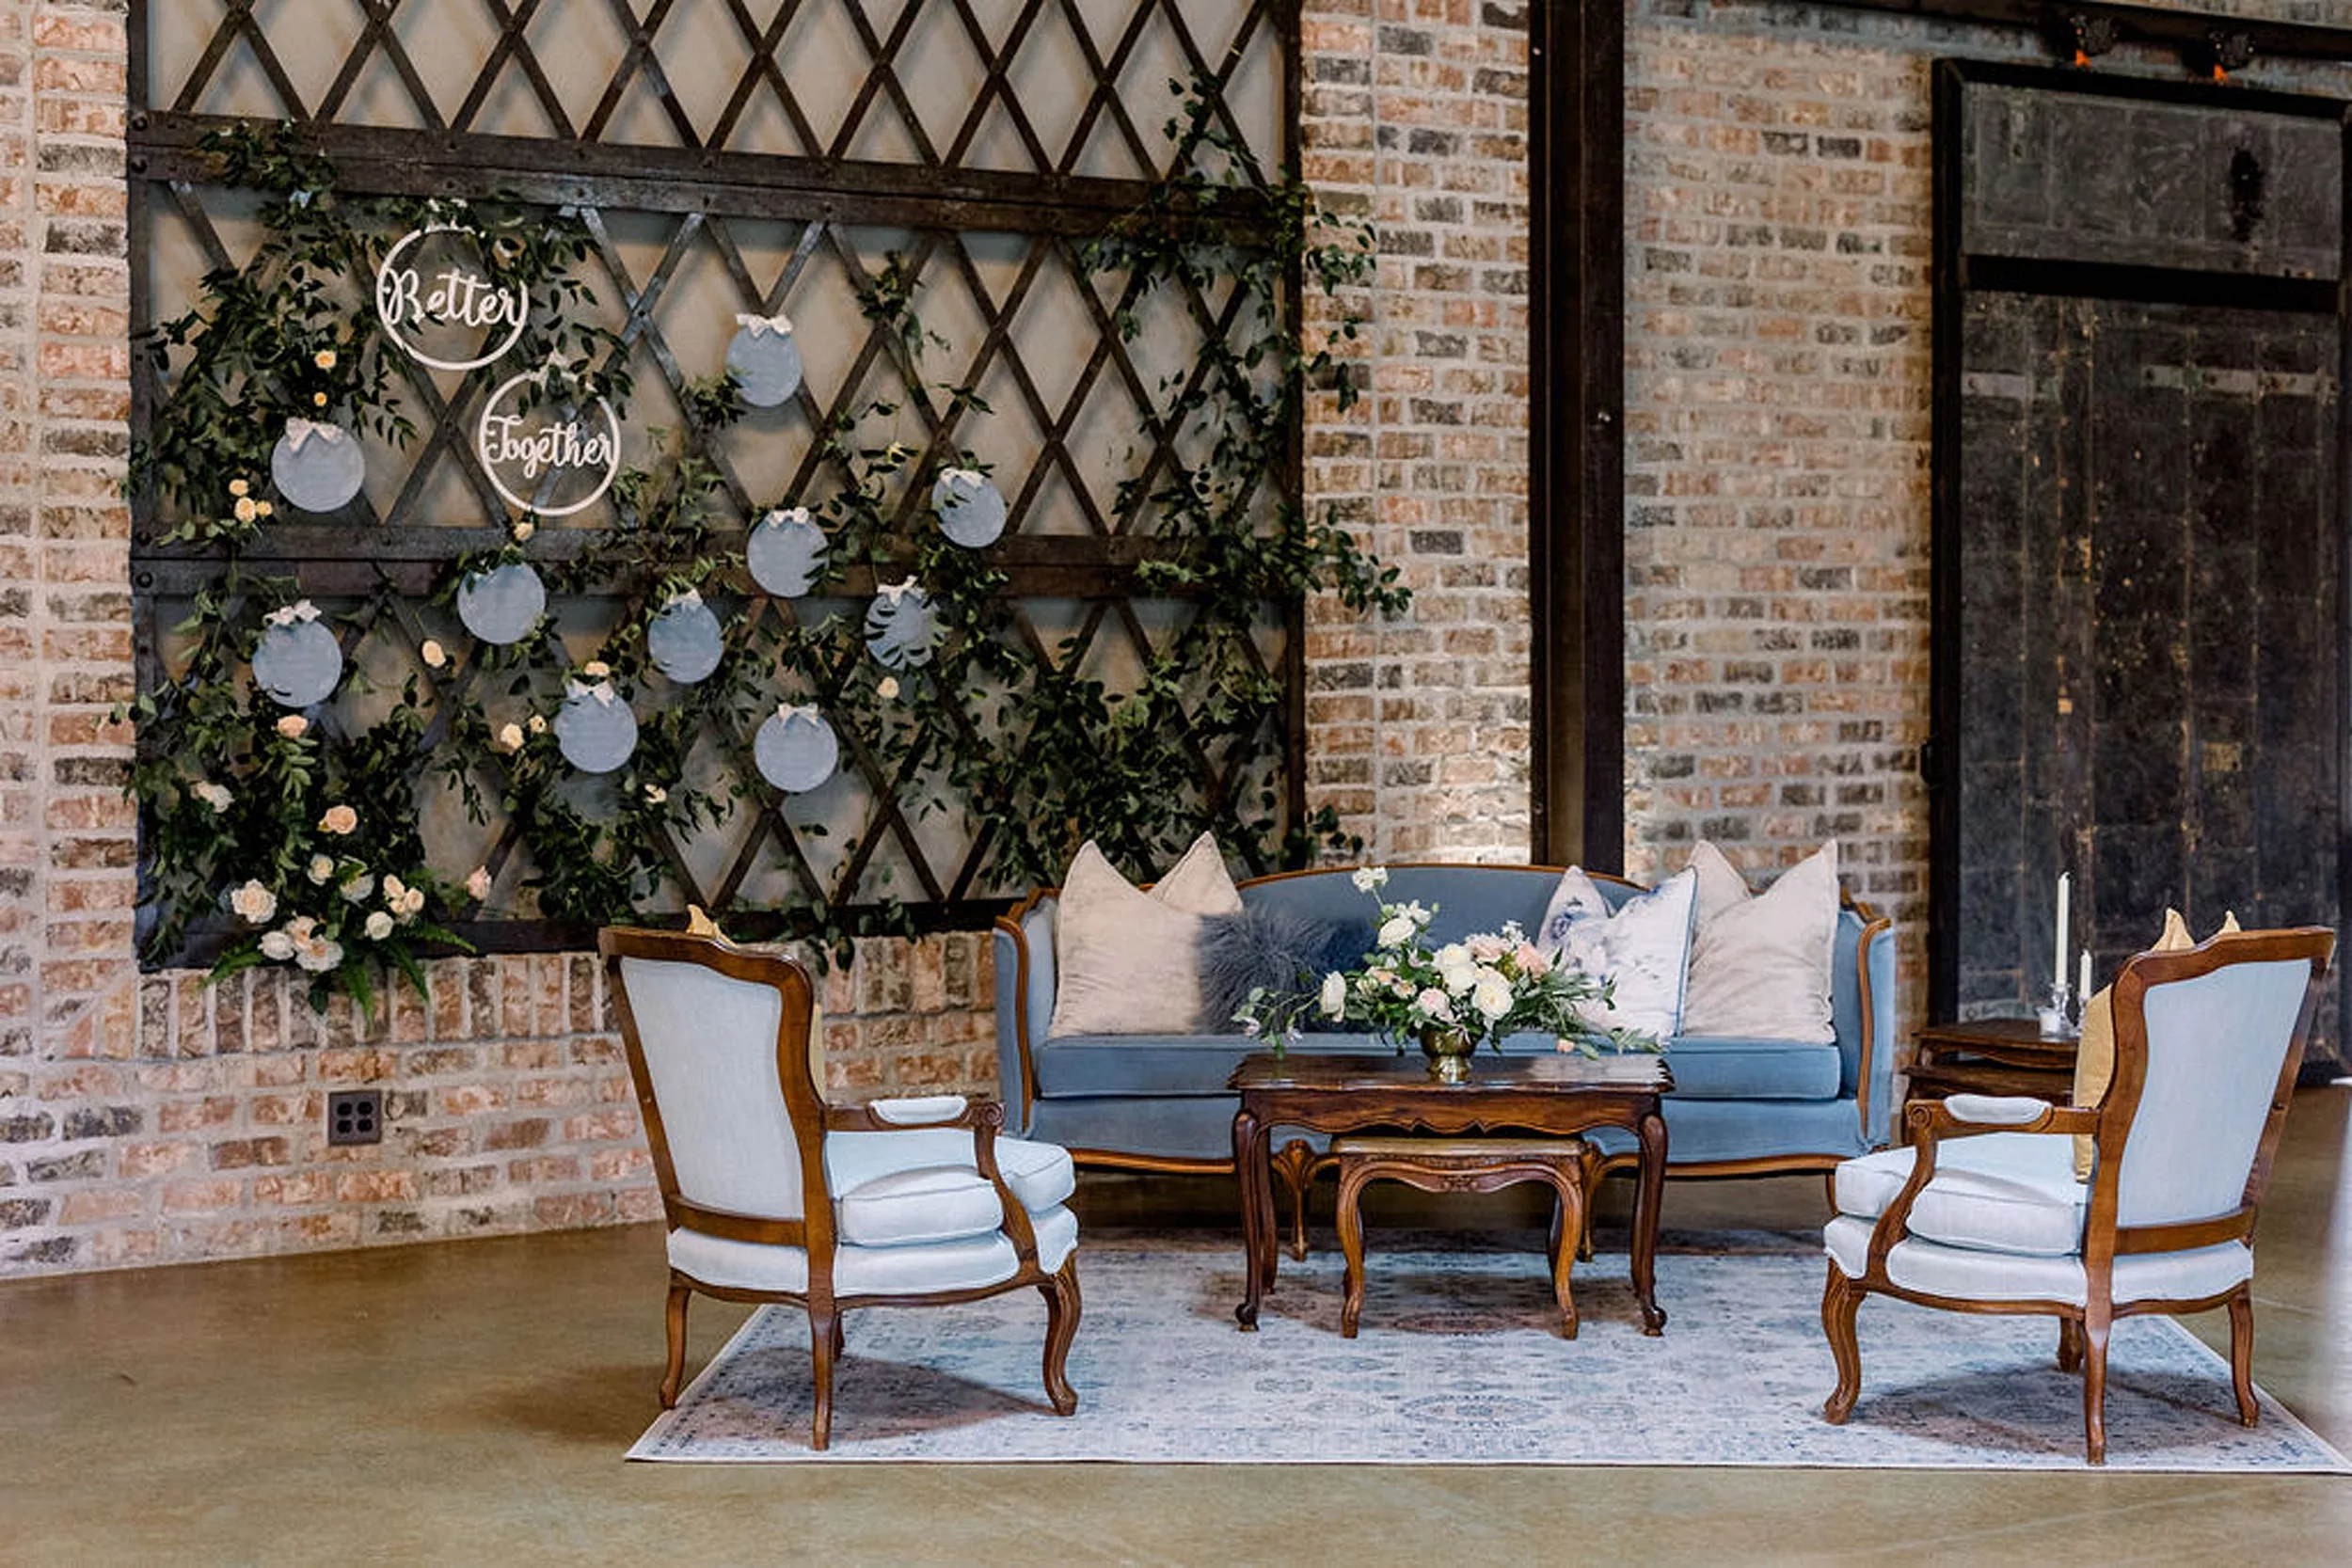 Details of a blue couch and chairs set in a lobby by a wooden decorated wall for a wedding